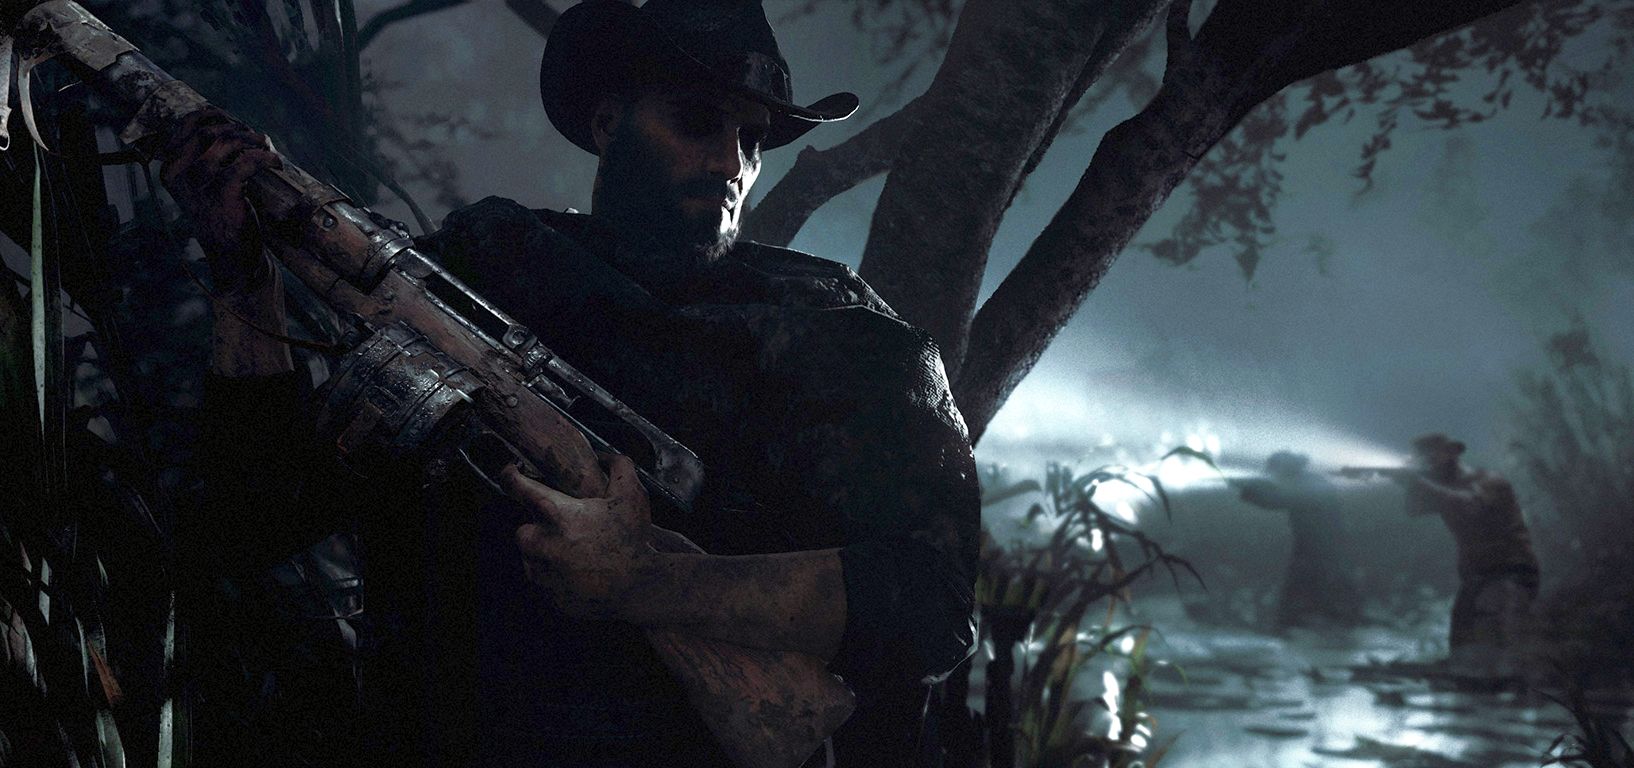 Image for Watch new gameplay from Hunt: Showdown, Crytek's PUBG-meets-Monster Hunter shooter